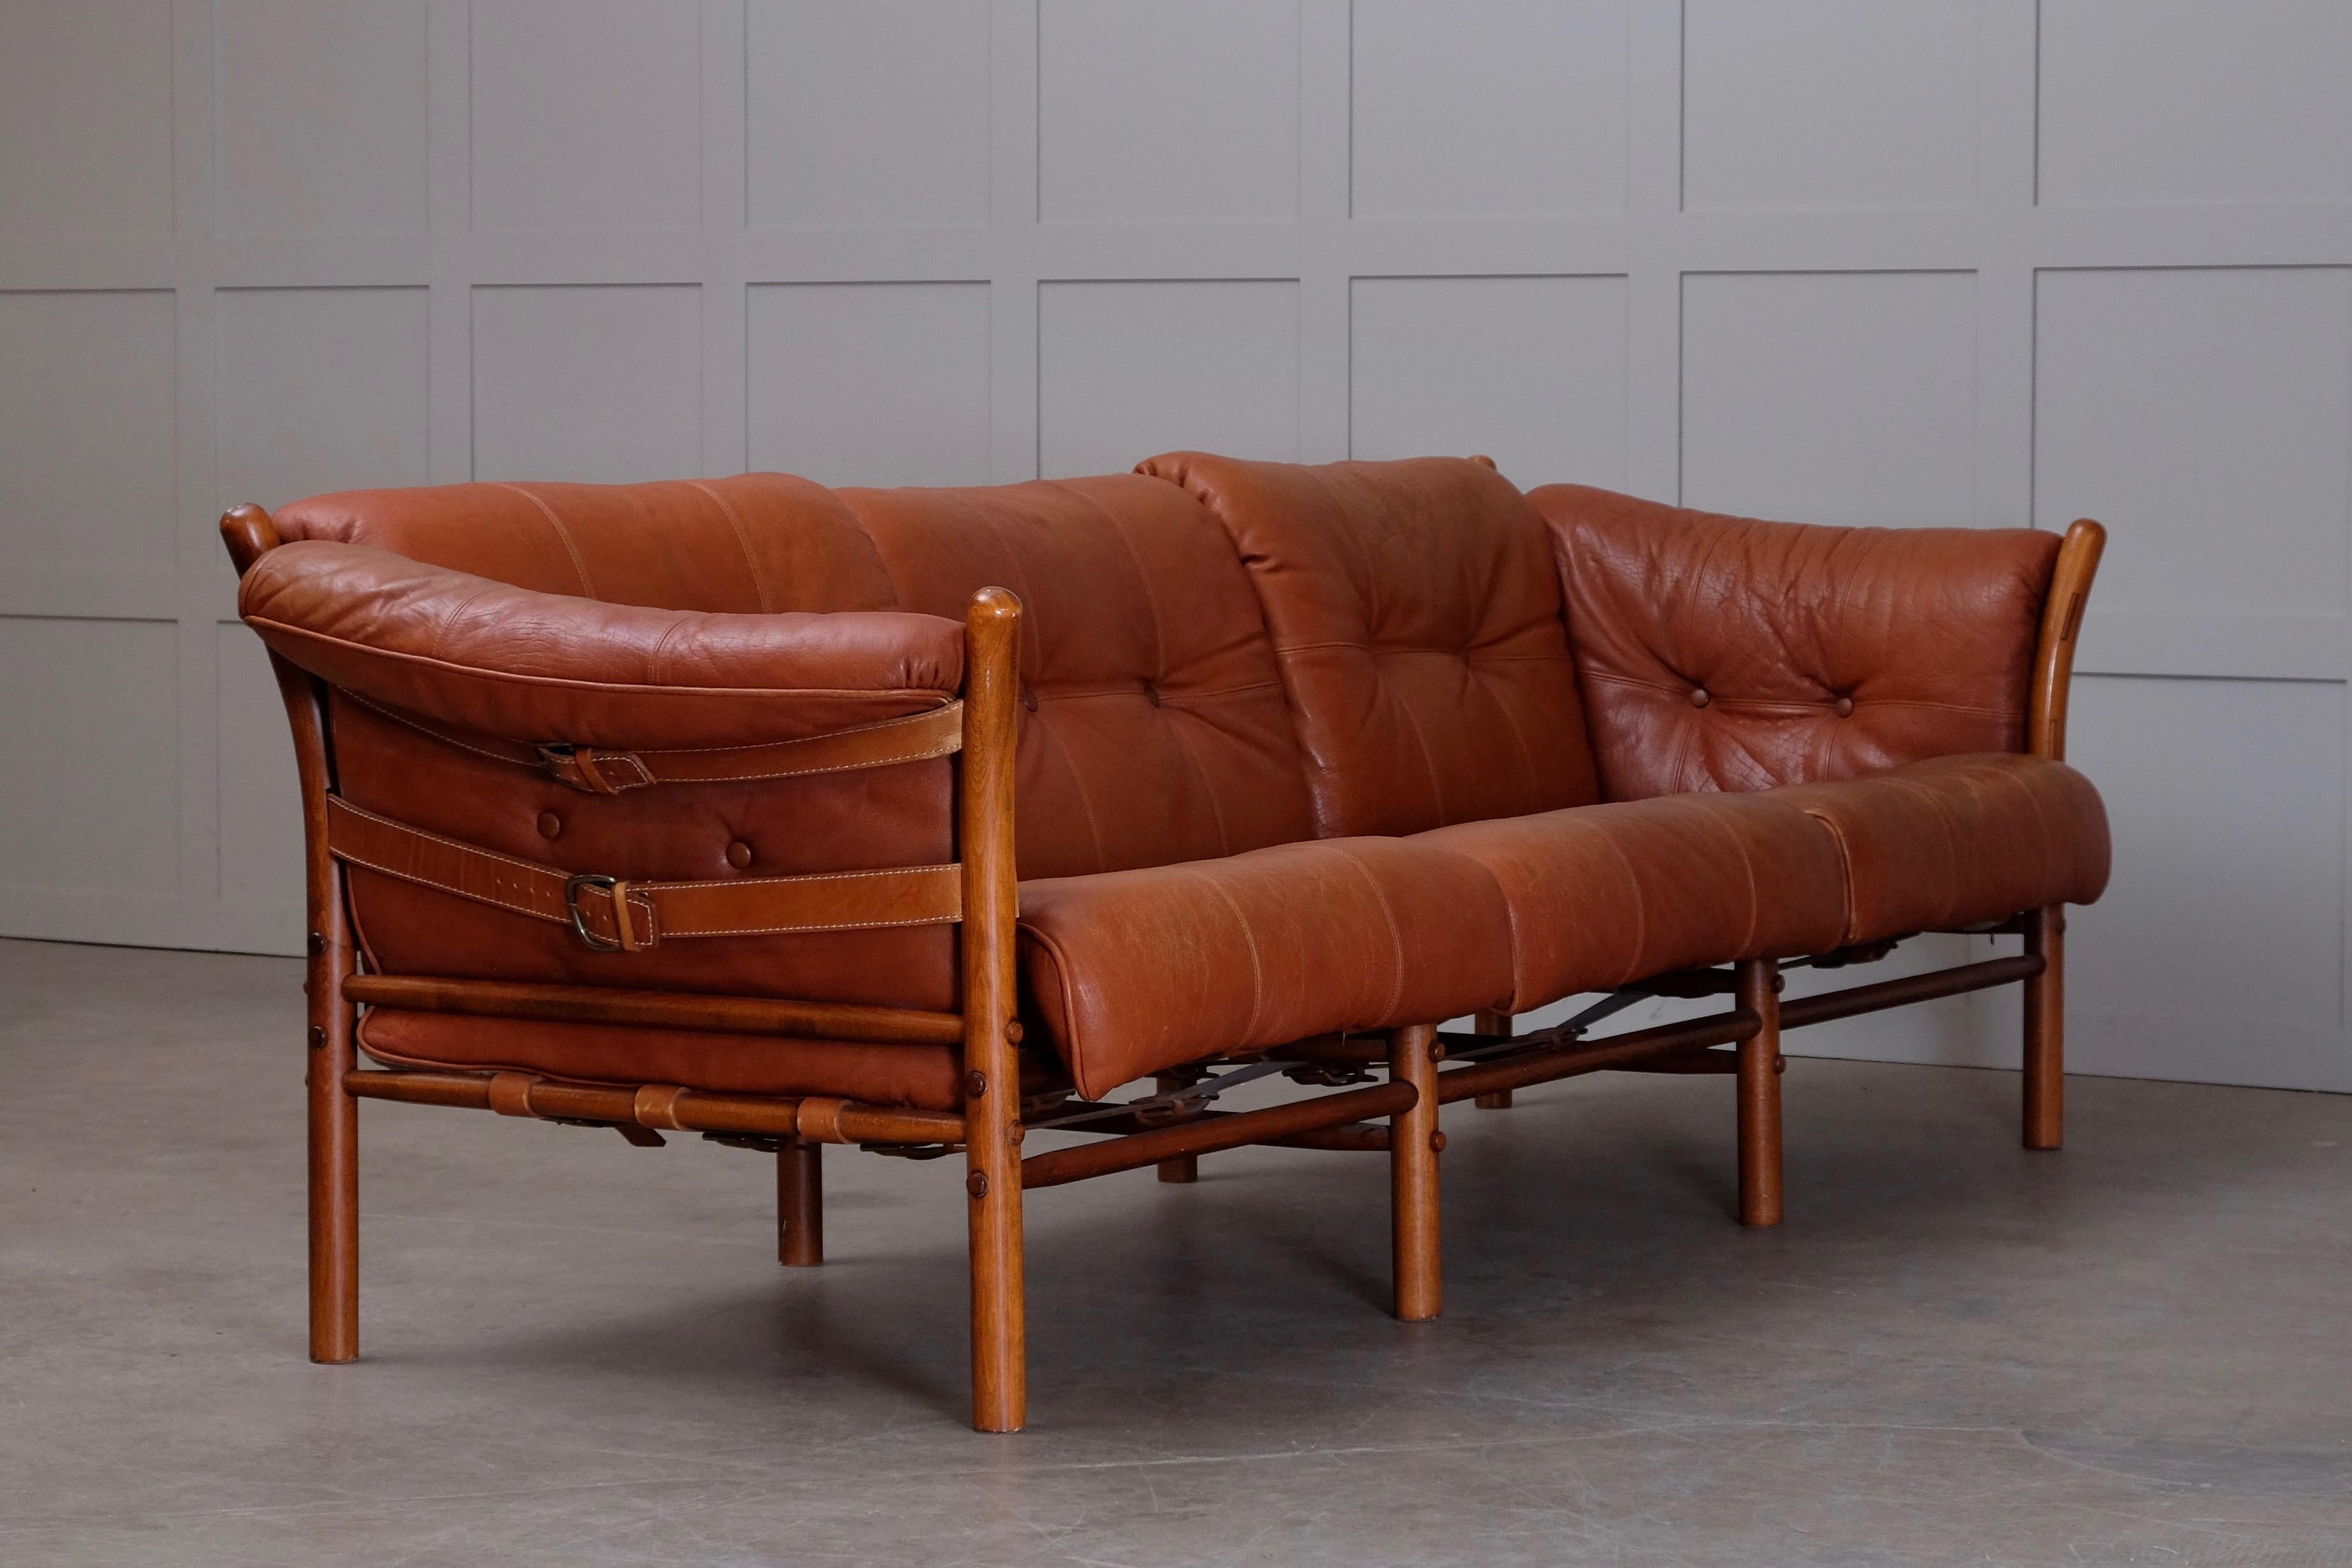 Arne Norell Leather Sofa, Model Indra, 1960s In Good Condition For Sale In Stockholm, SE